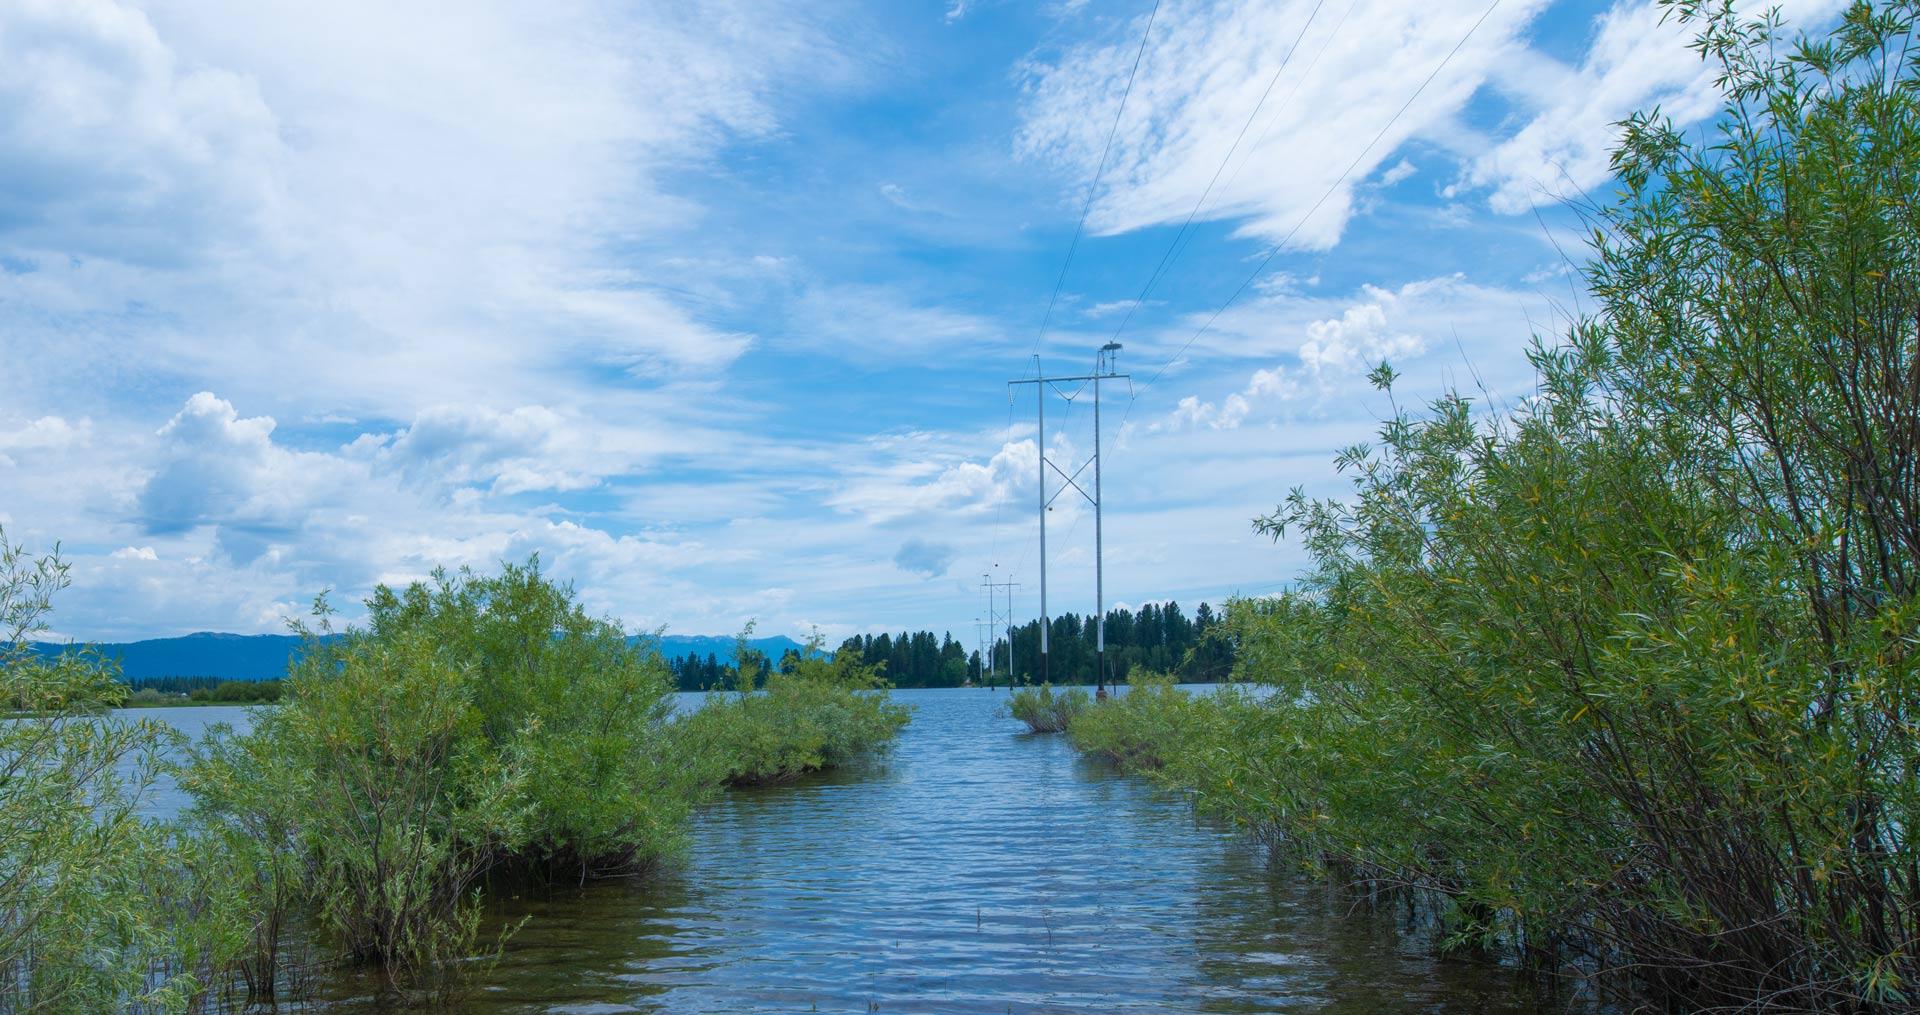 Image of transmission lines across a lake